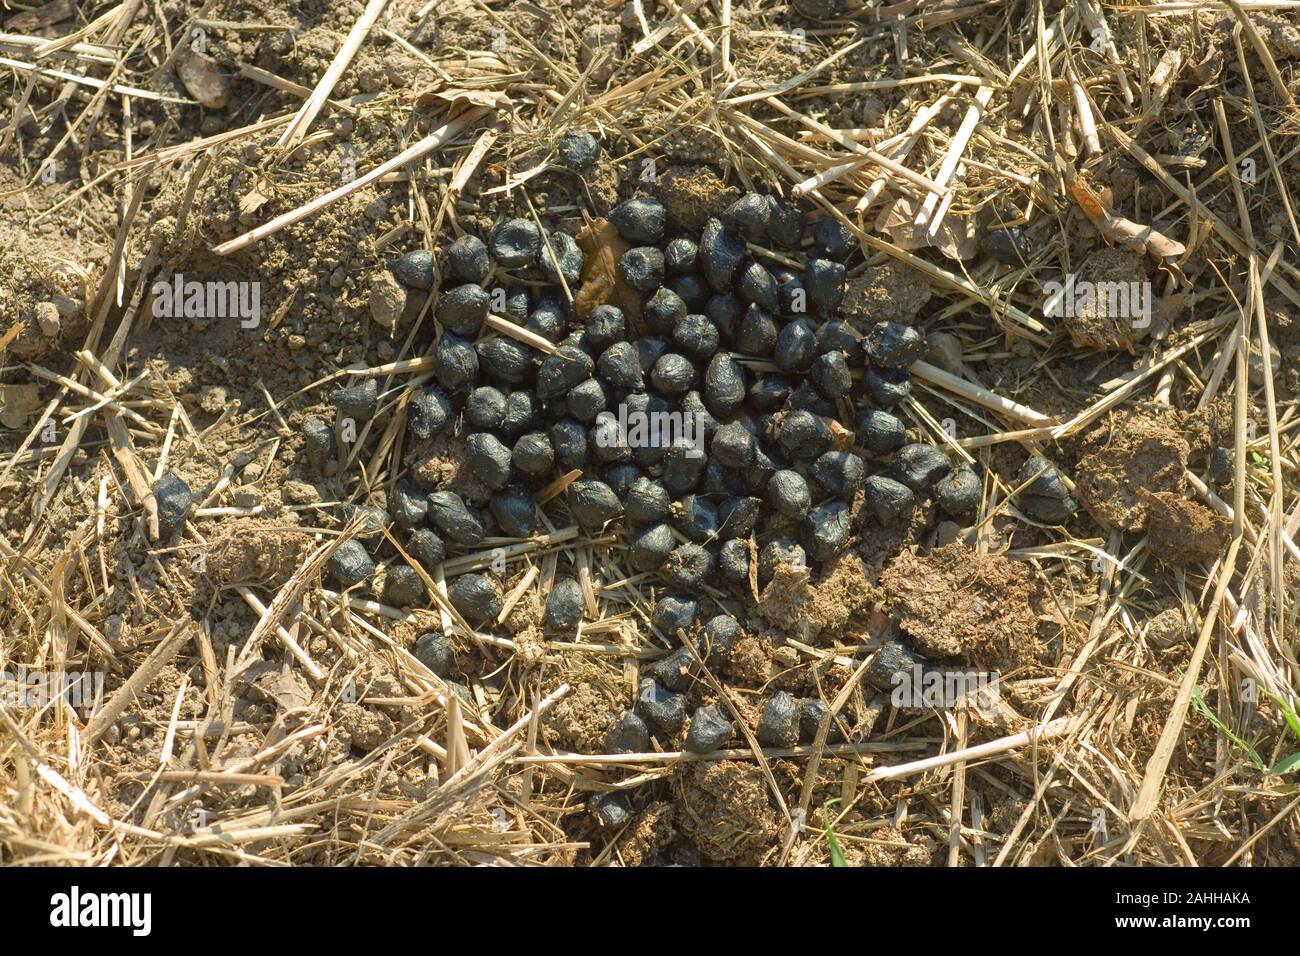 RED DEER (Cervus elaphus). Droppings or faecal pellets from a hind, left in a cereal harvested field. October, Norfolk. Stock Photo